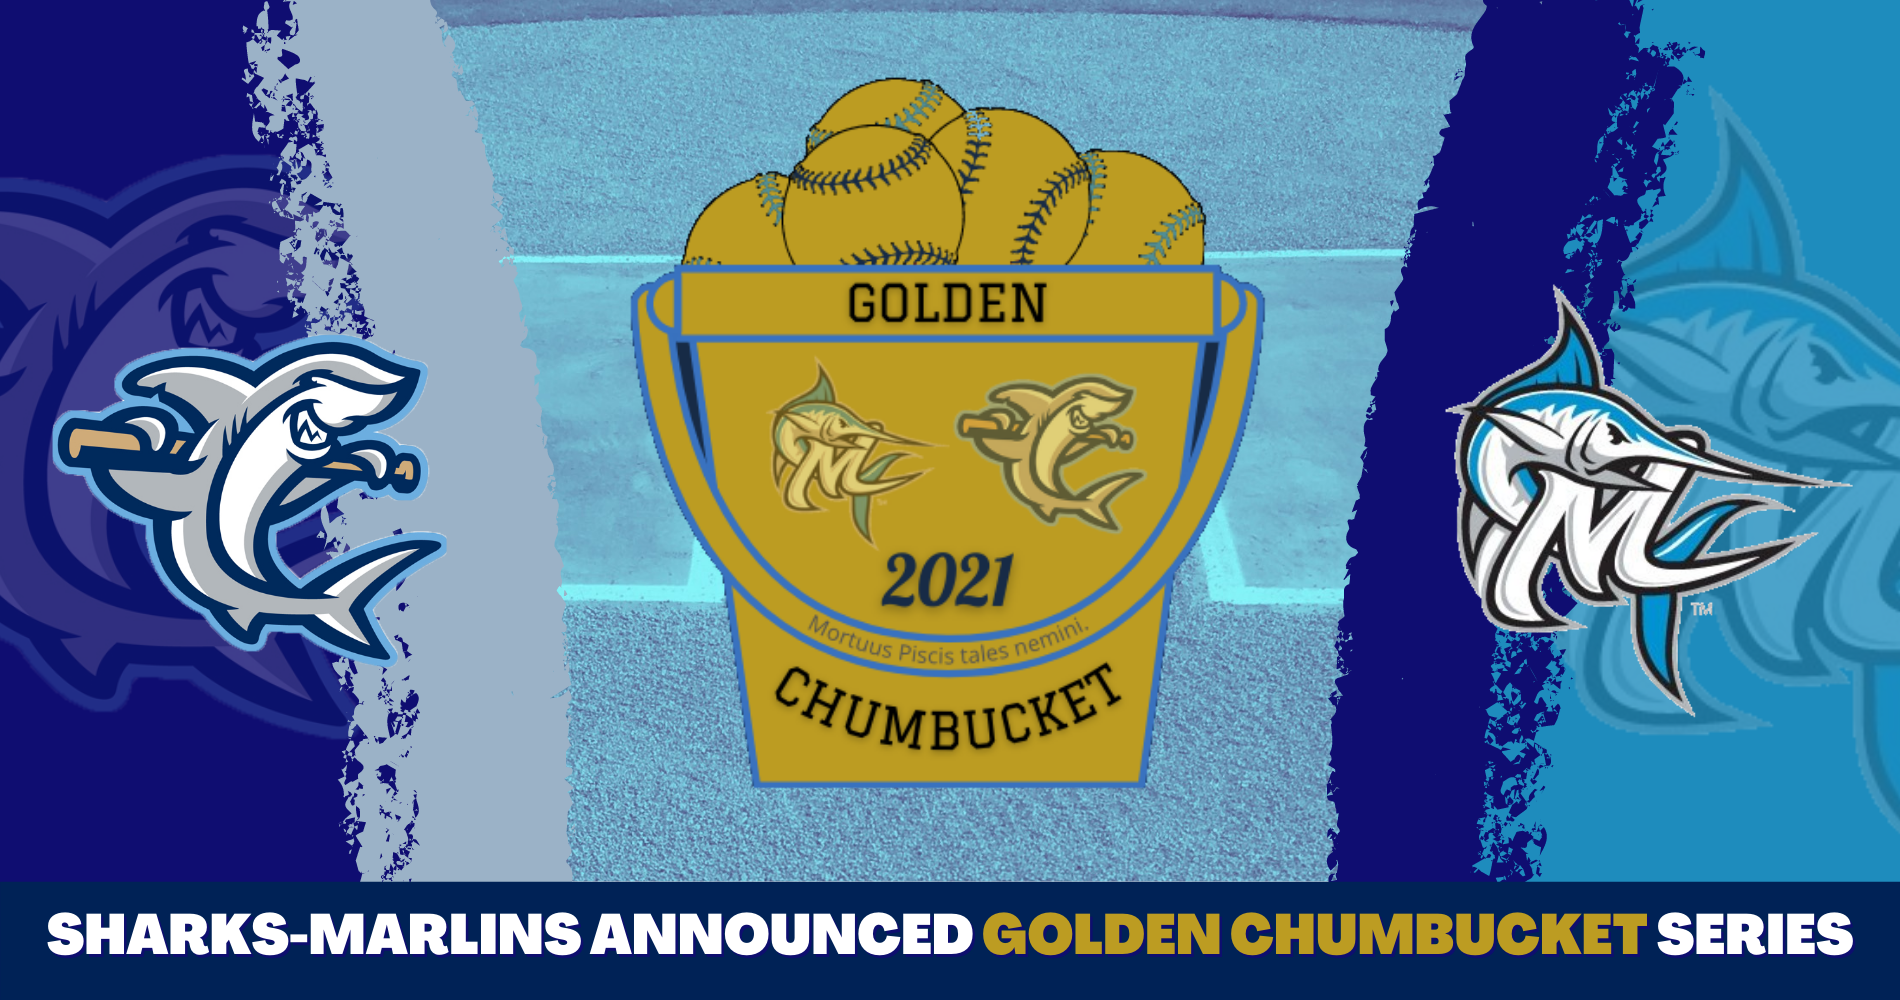 Marlins and Sharks to battle for the Golden Chumbucket starting in 2021